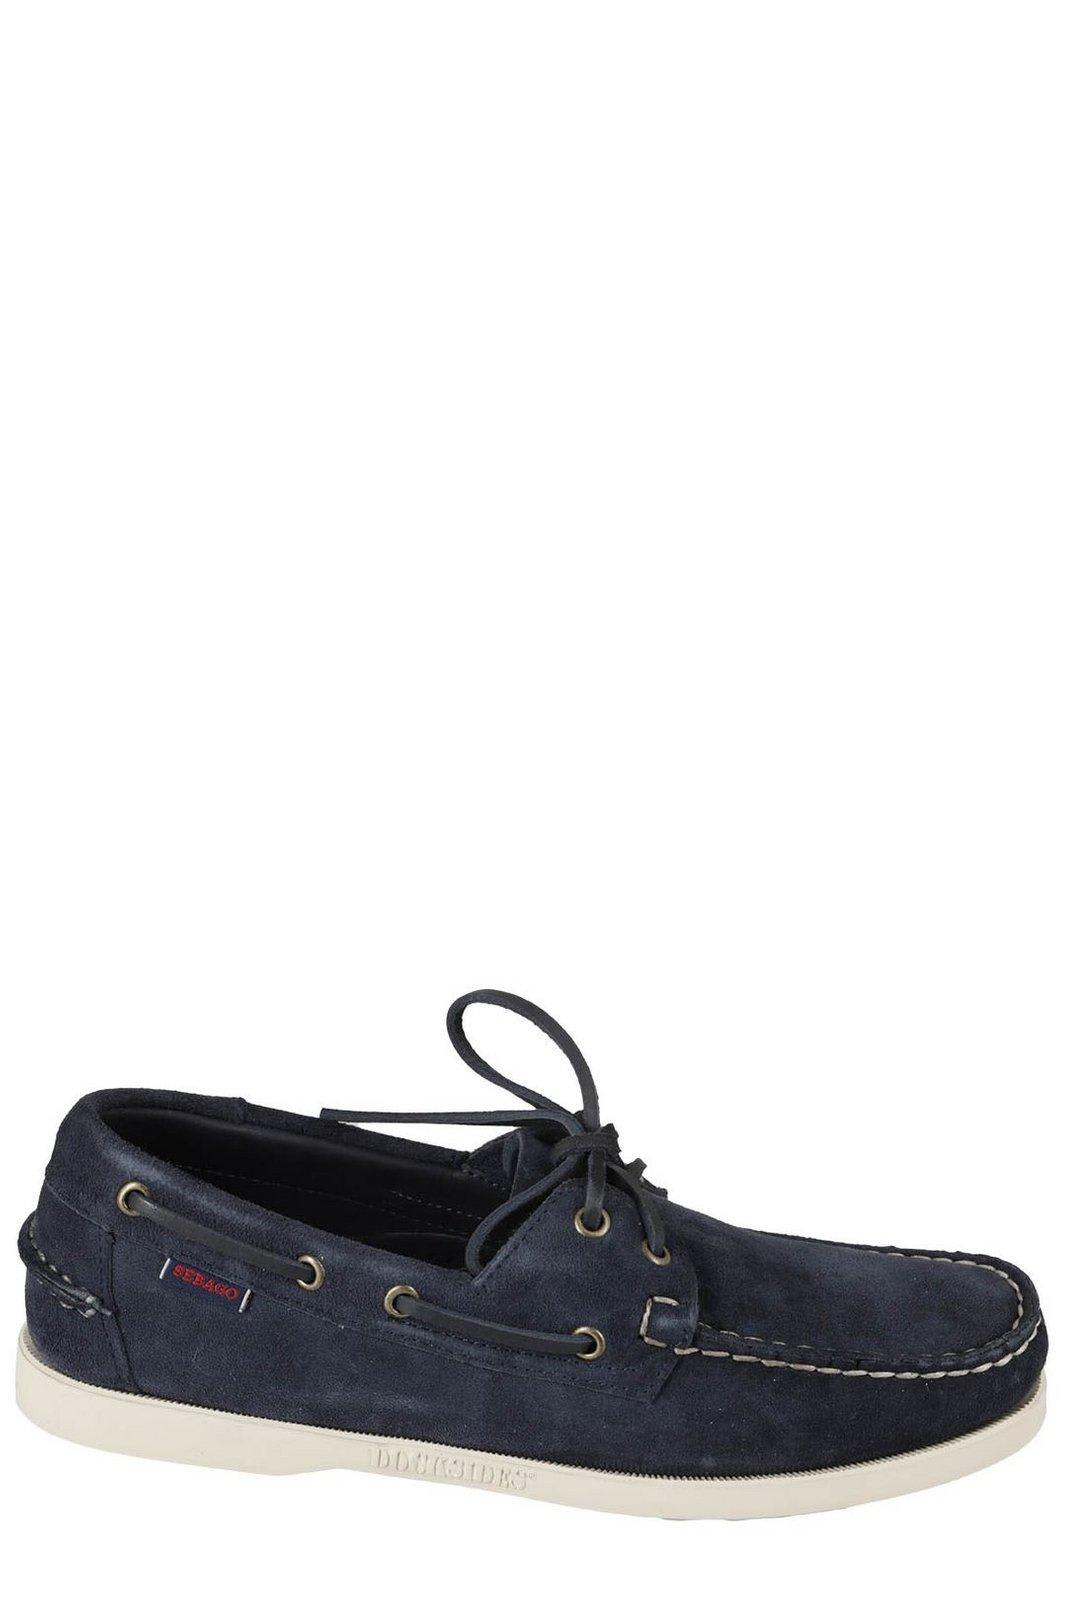 Sebago Lace-up Round Toe Boat Shoes In Blue Navy